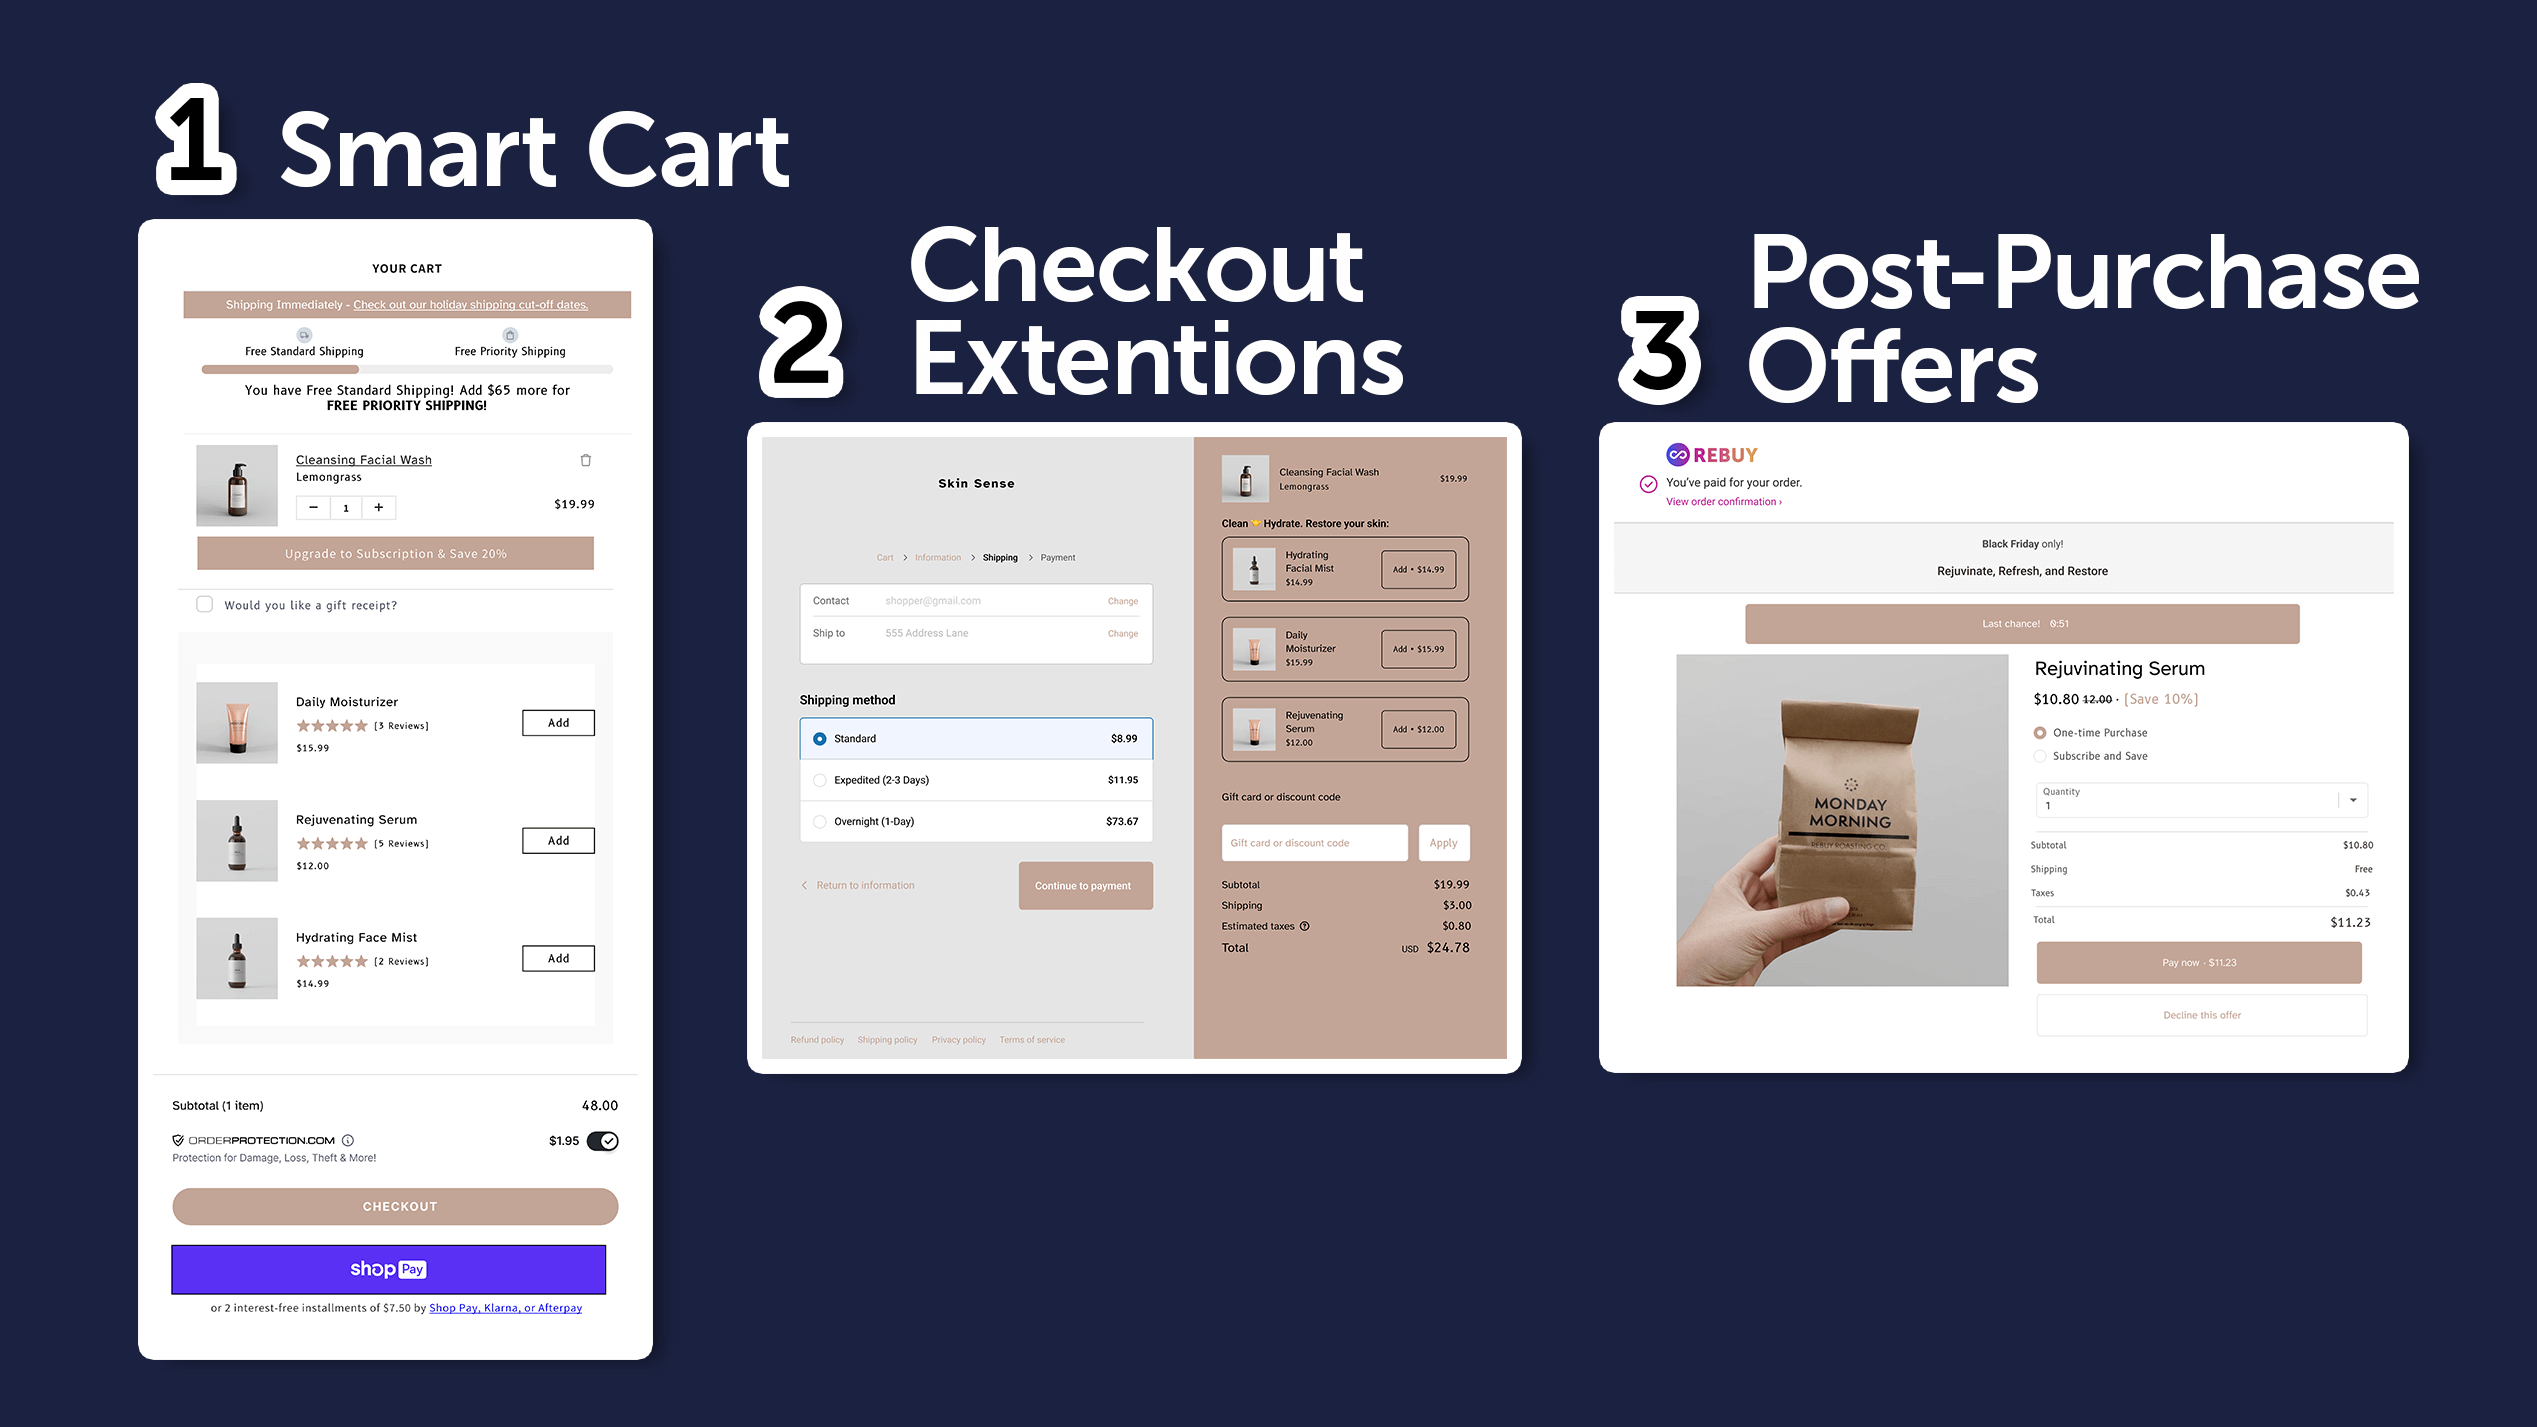 Screenshots showing the steps in the checkout experience: shopping cart, checkout page, and post-purchase offer